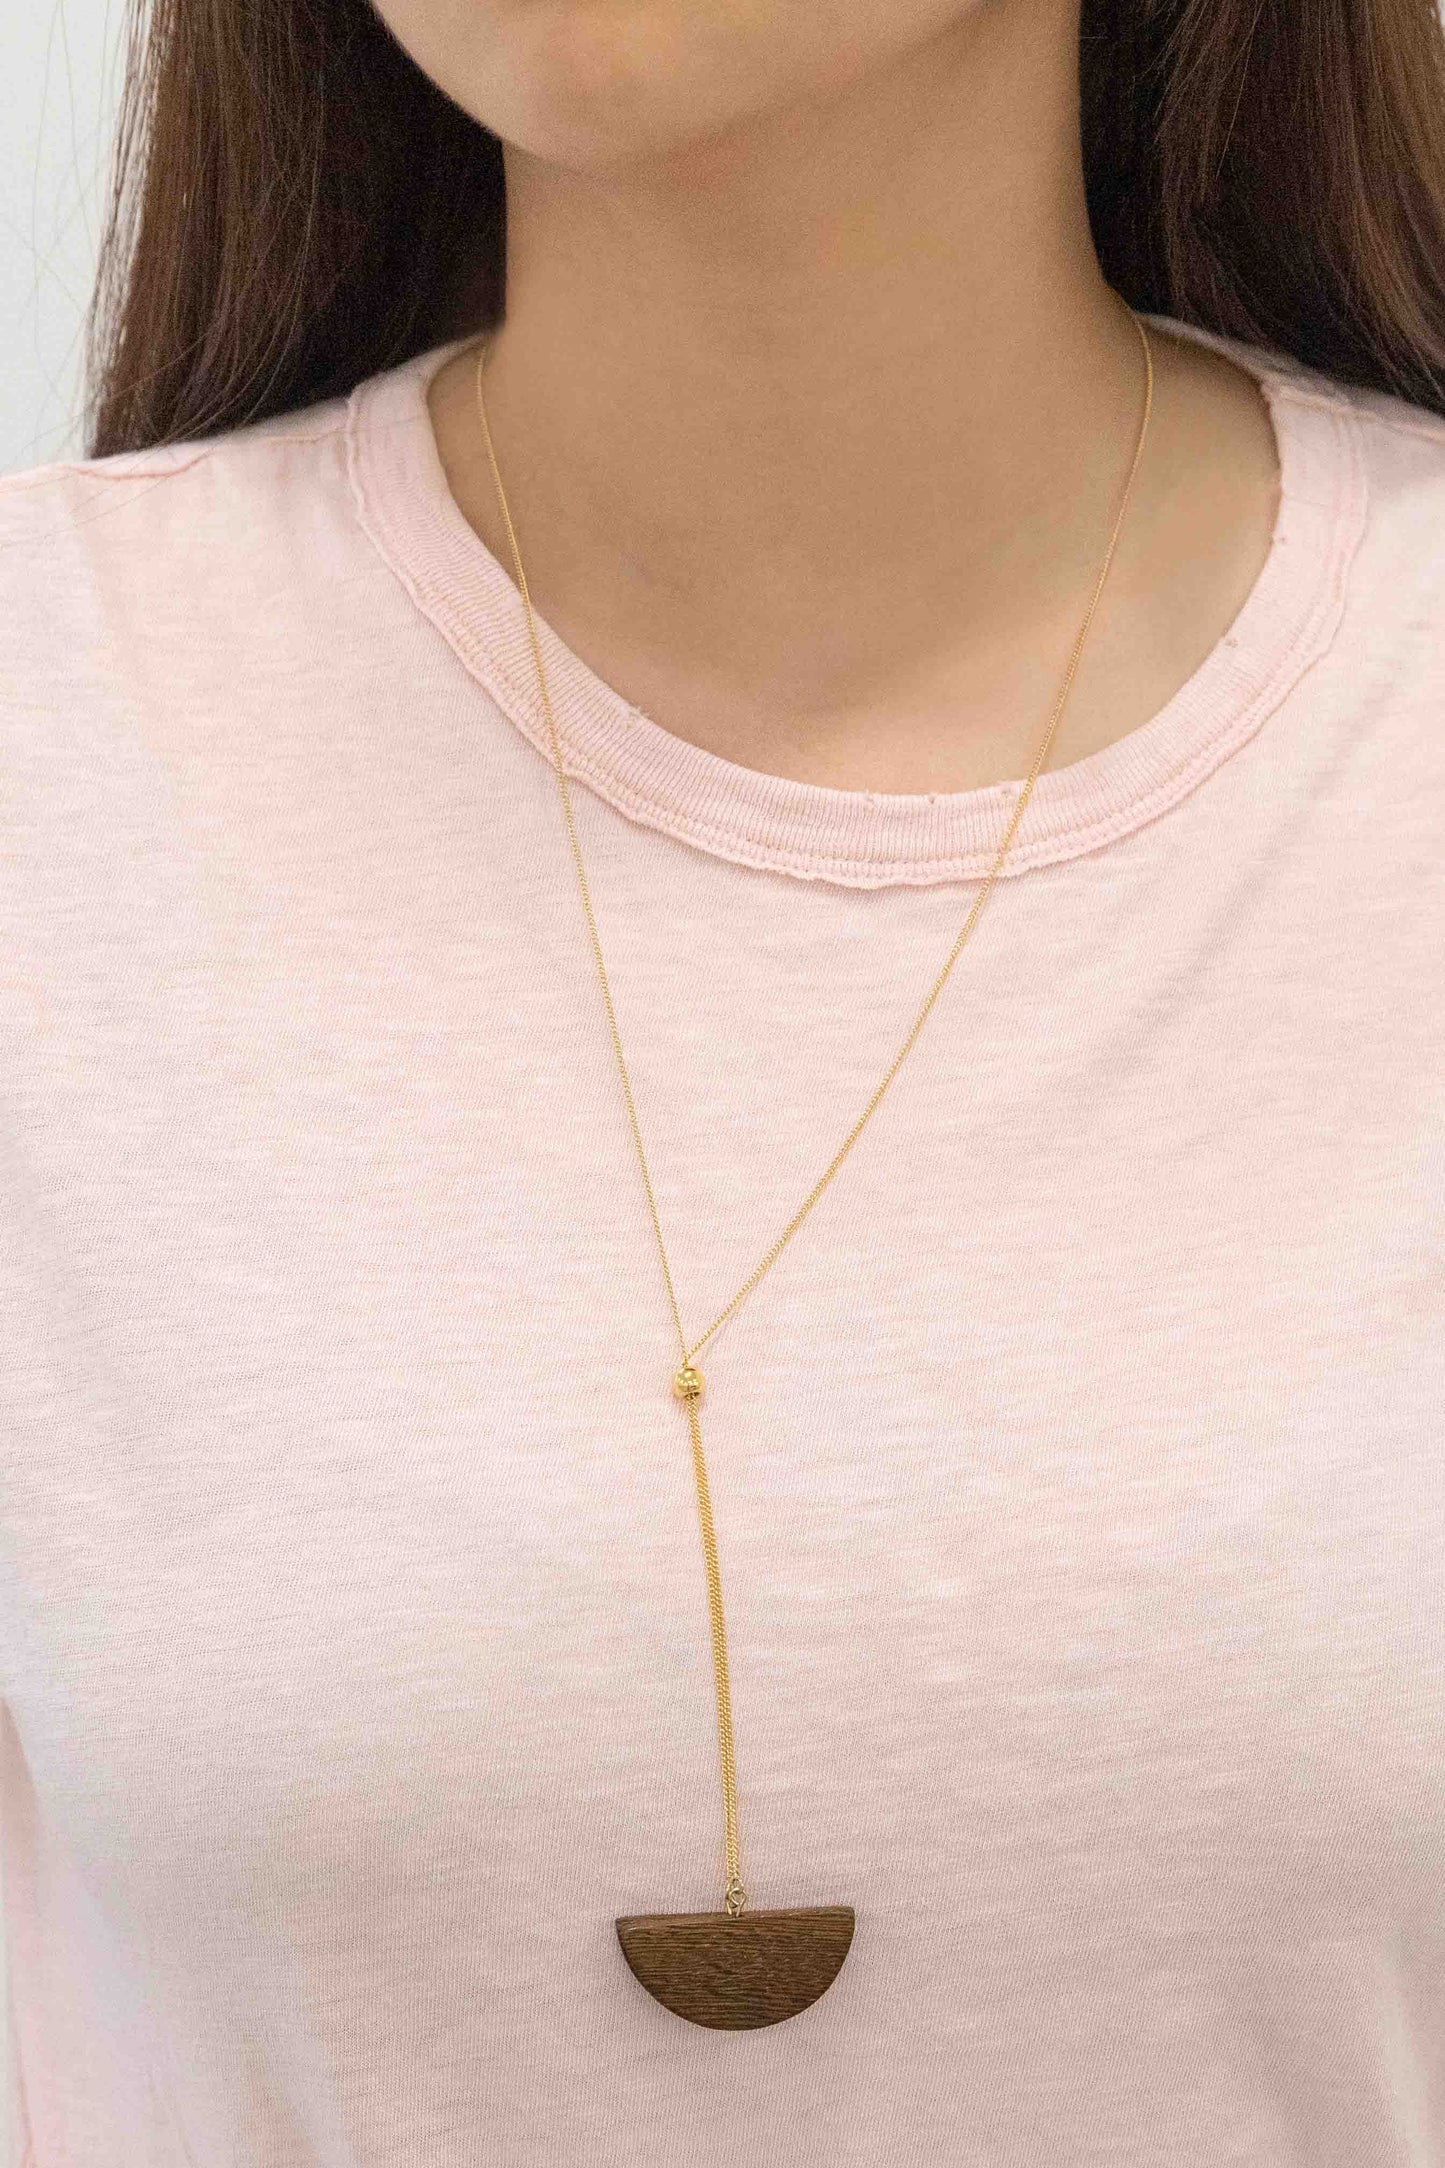 Darling Duo Wood Bolo Necklace